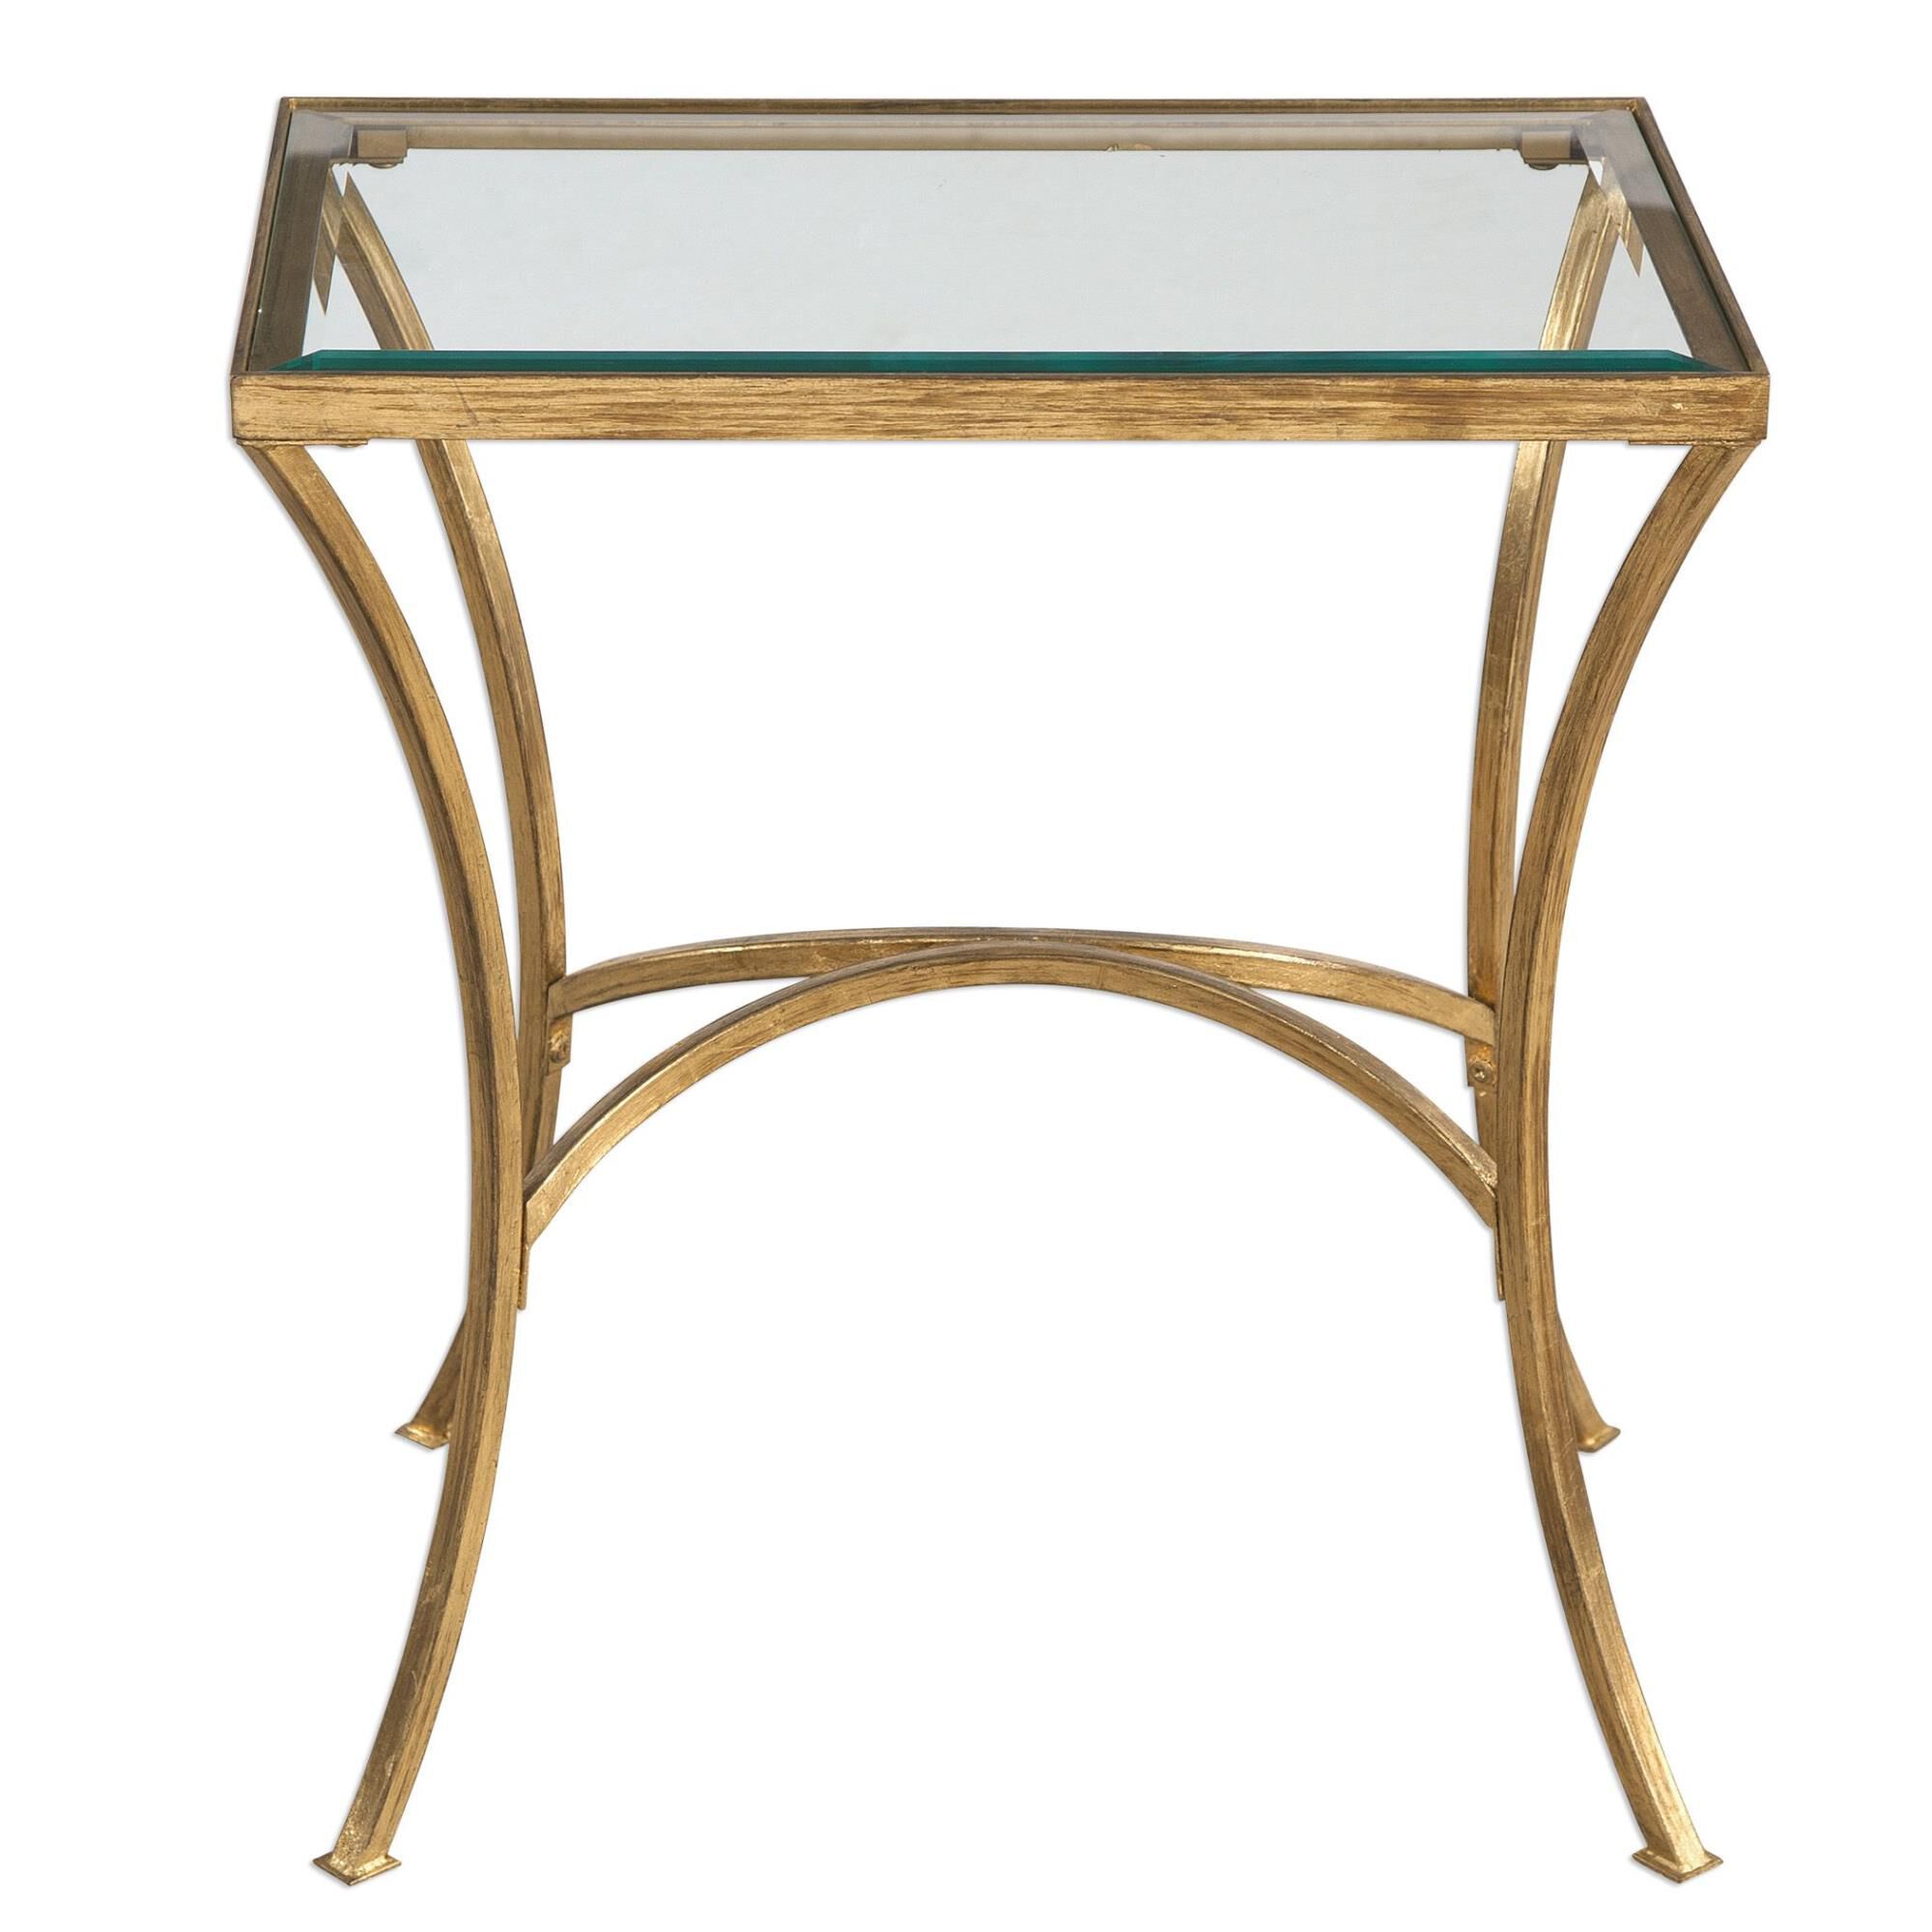 Alayna End Table by Uttermost | Capitol Lighting 1800lighting.com